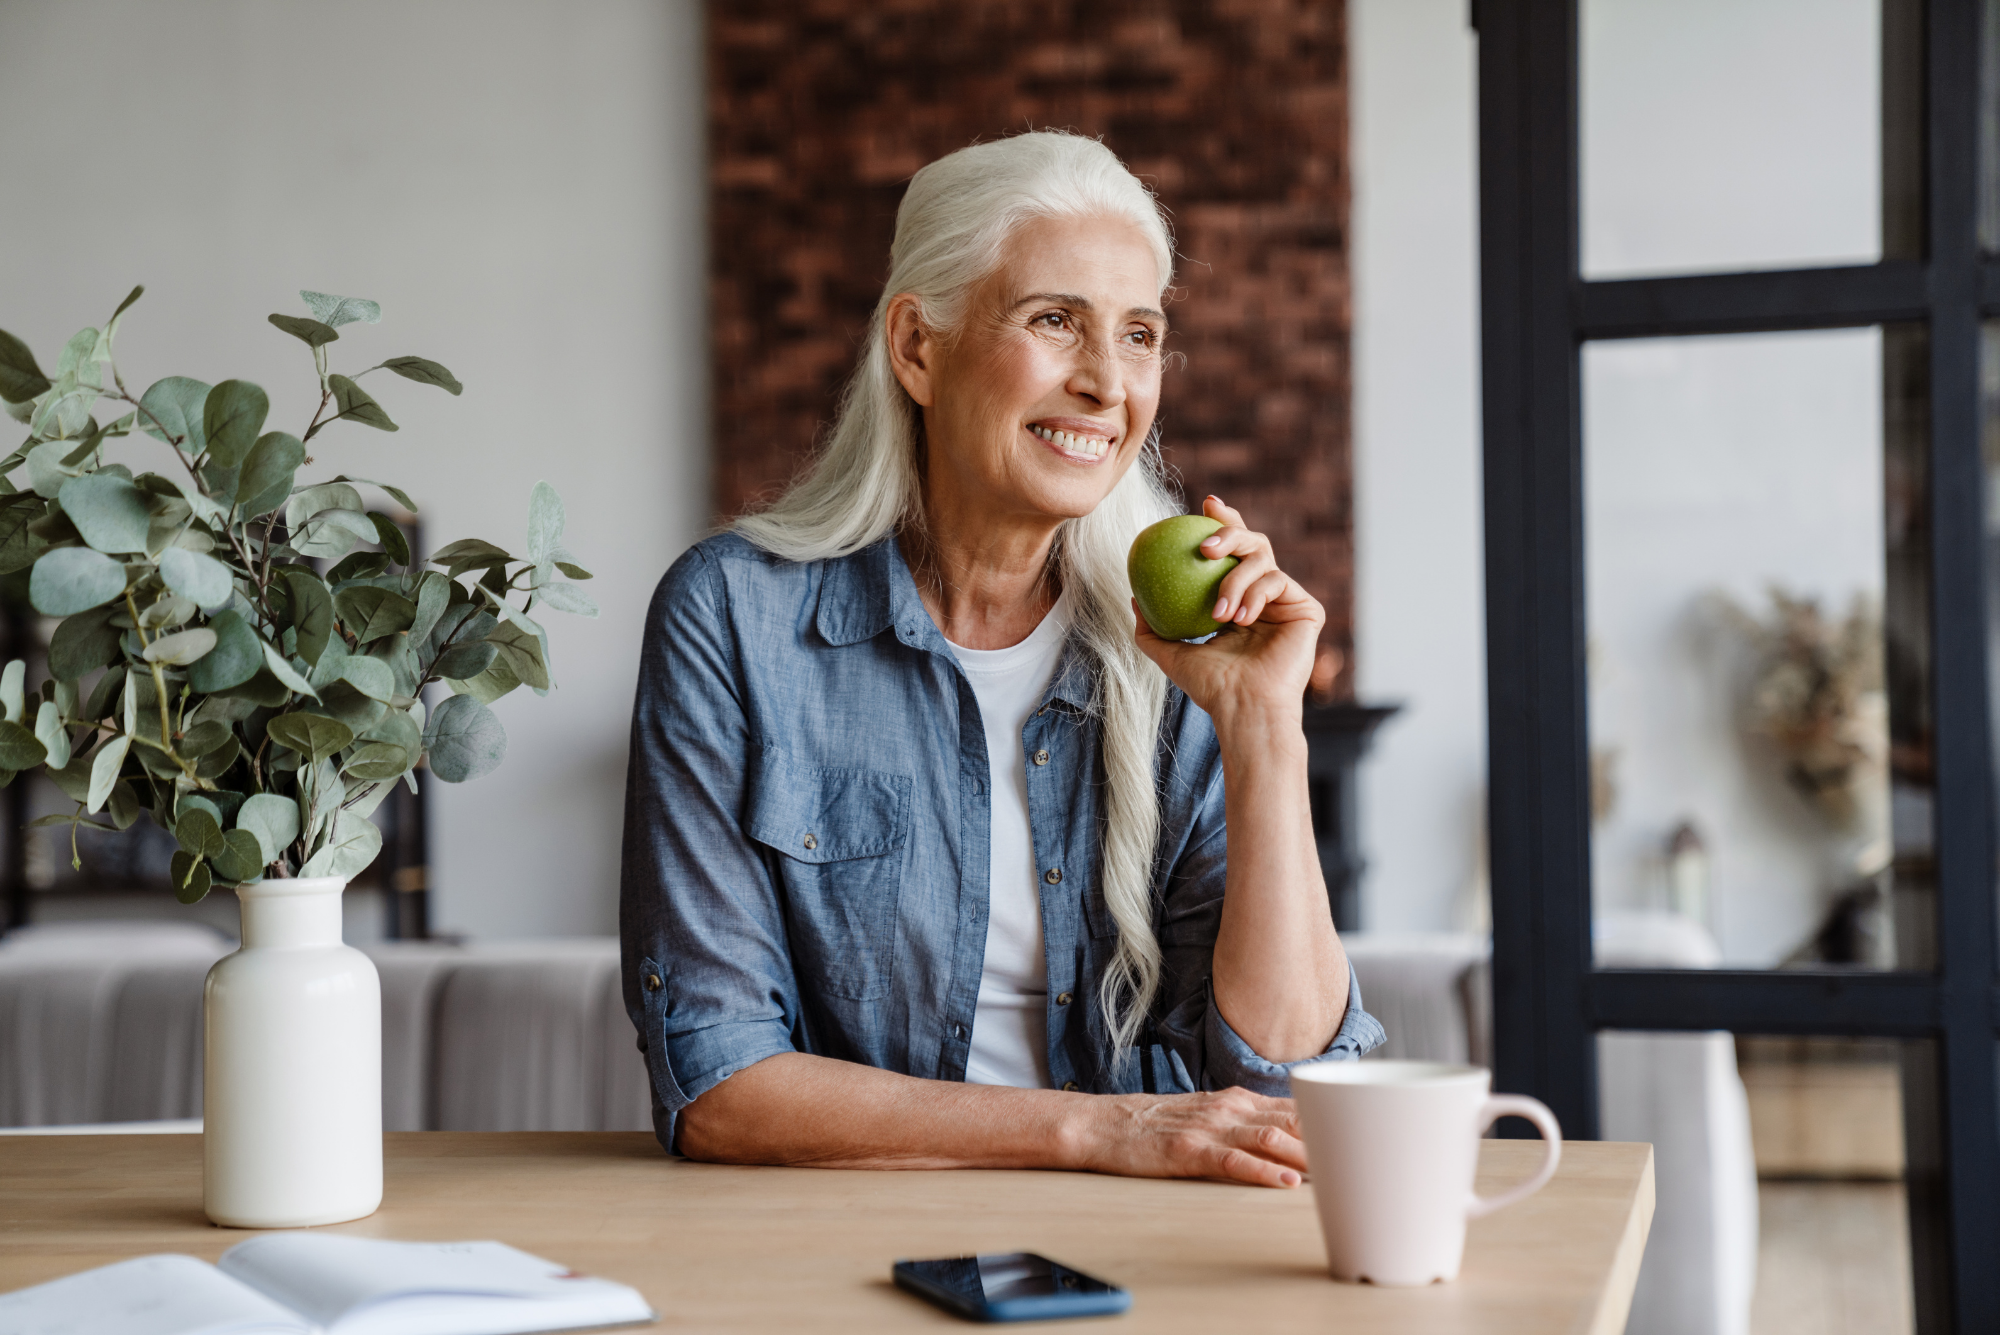 An older woman smiles while eating a green apple because she’s had a long, healthy lifespan.